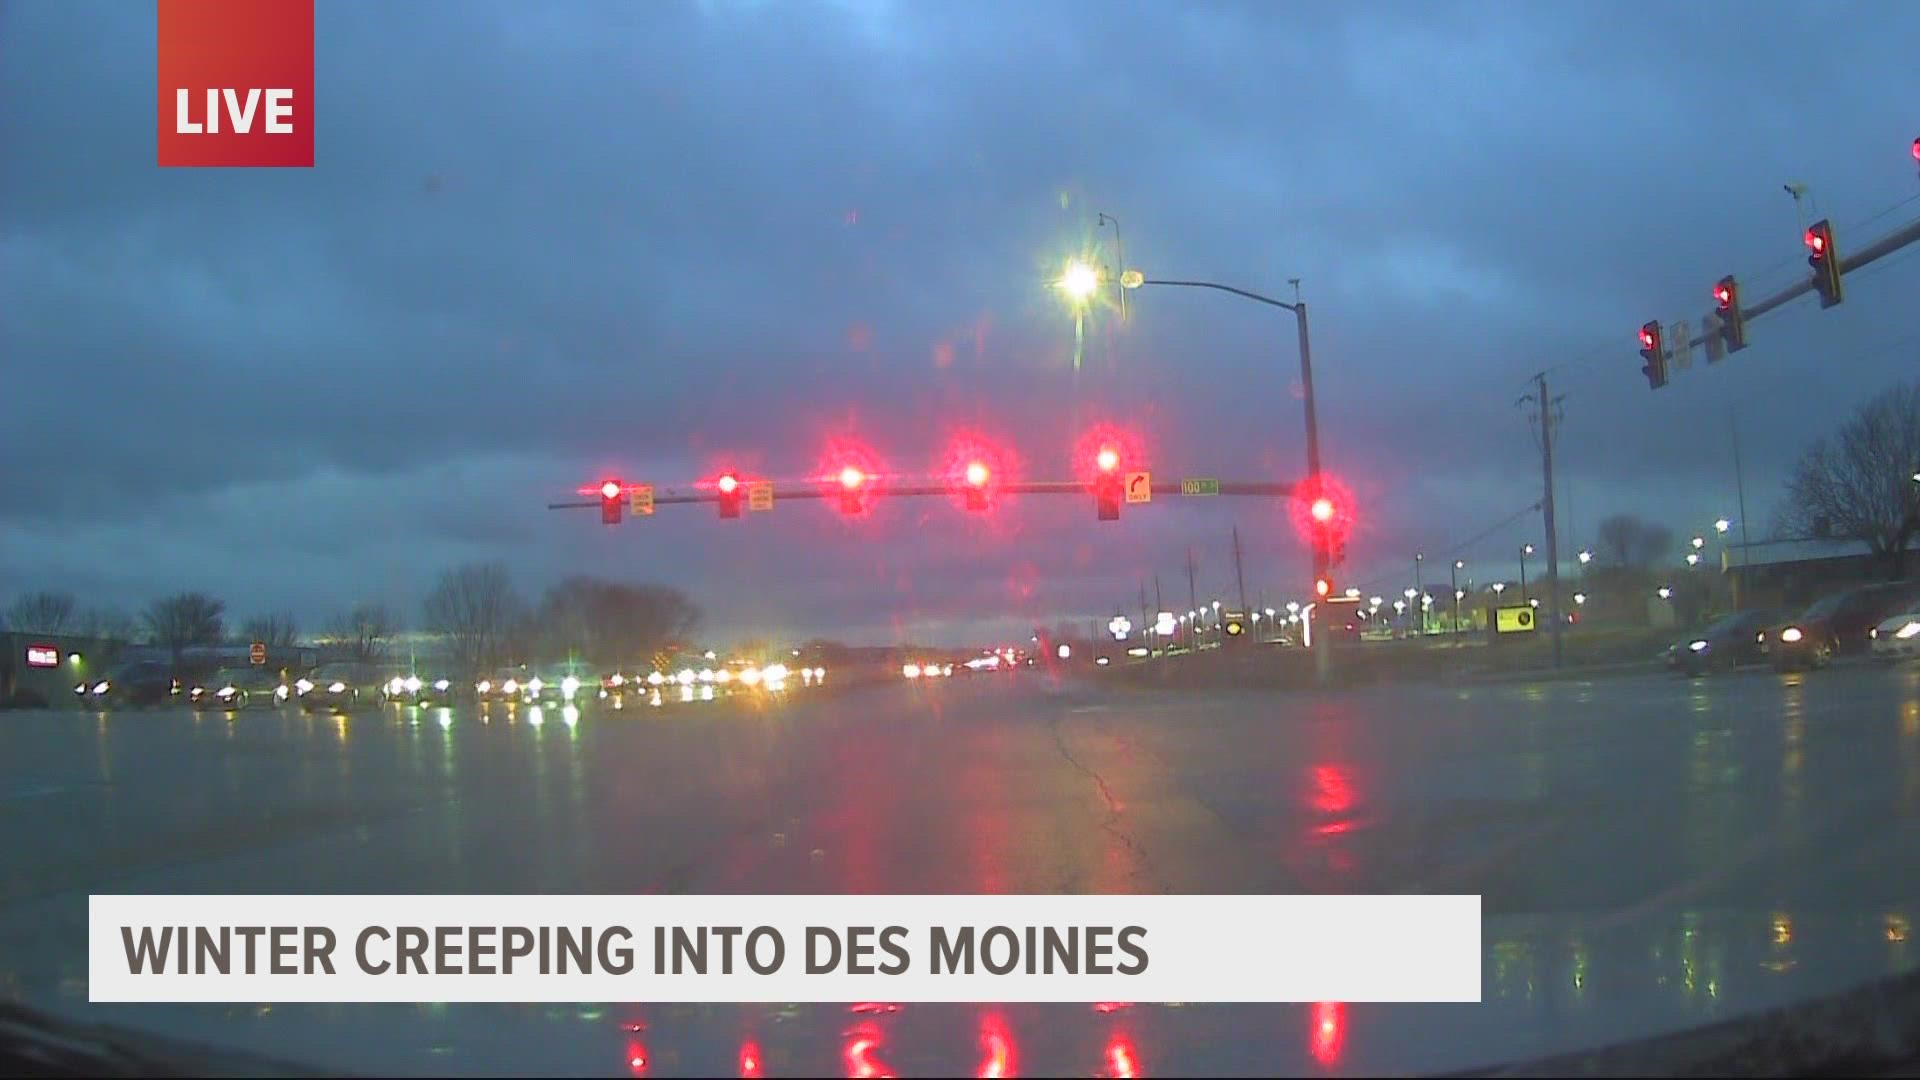 Local 5 Meteorologist Dave Downey hit the streets in central Iowa to see firsthand what the winter weather has in store.